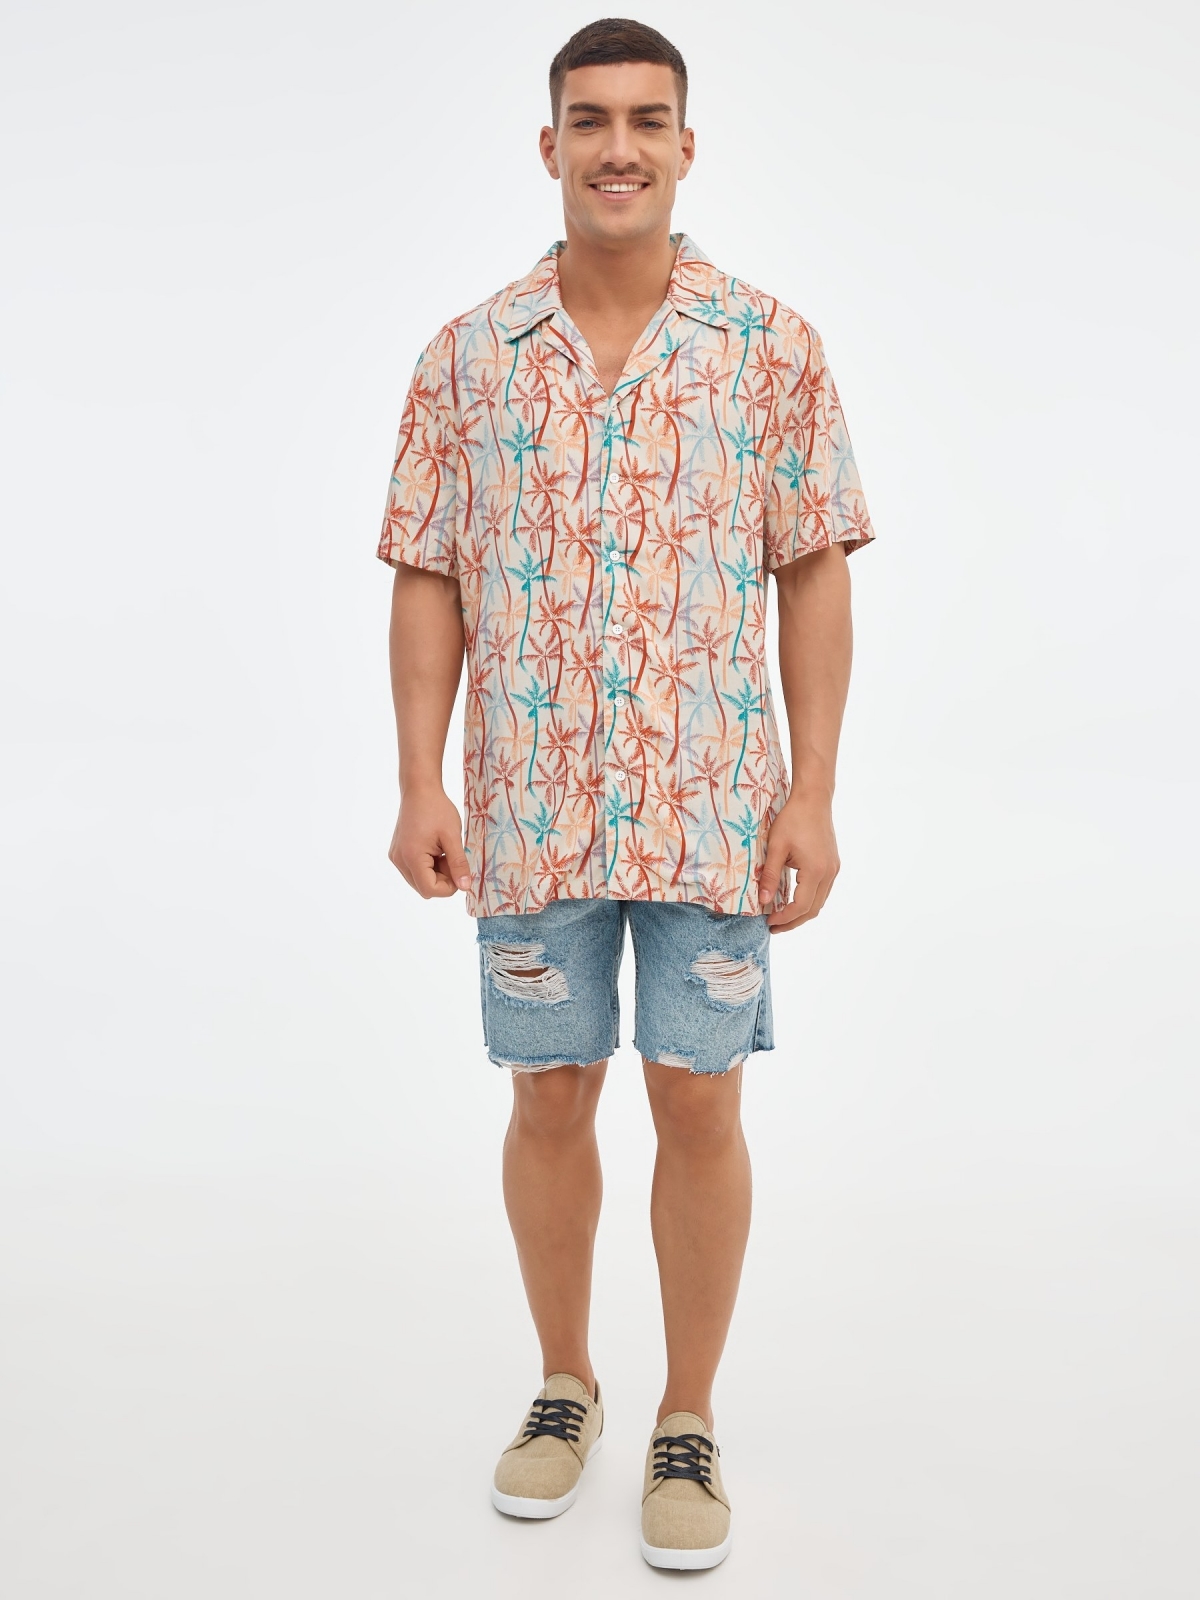 Multicolor palm print shirt off white front view